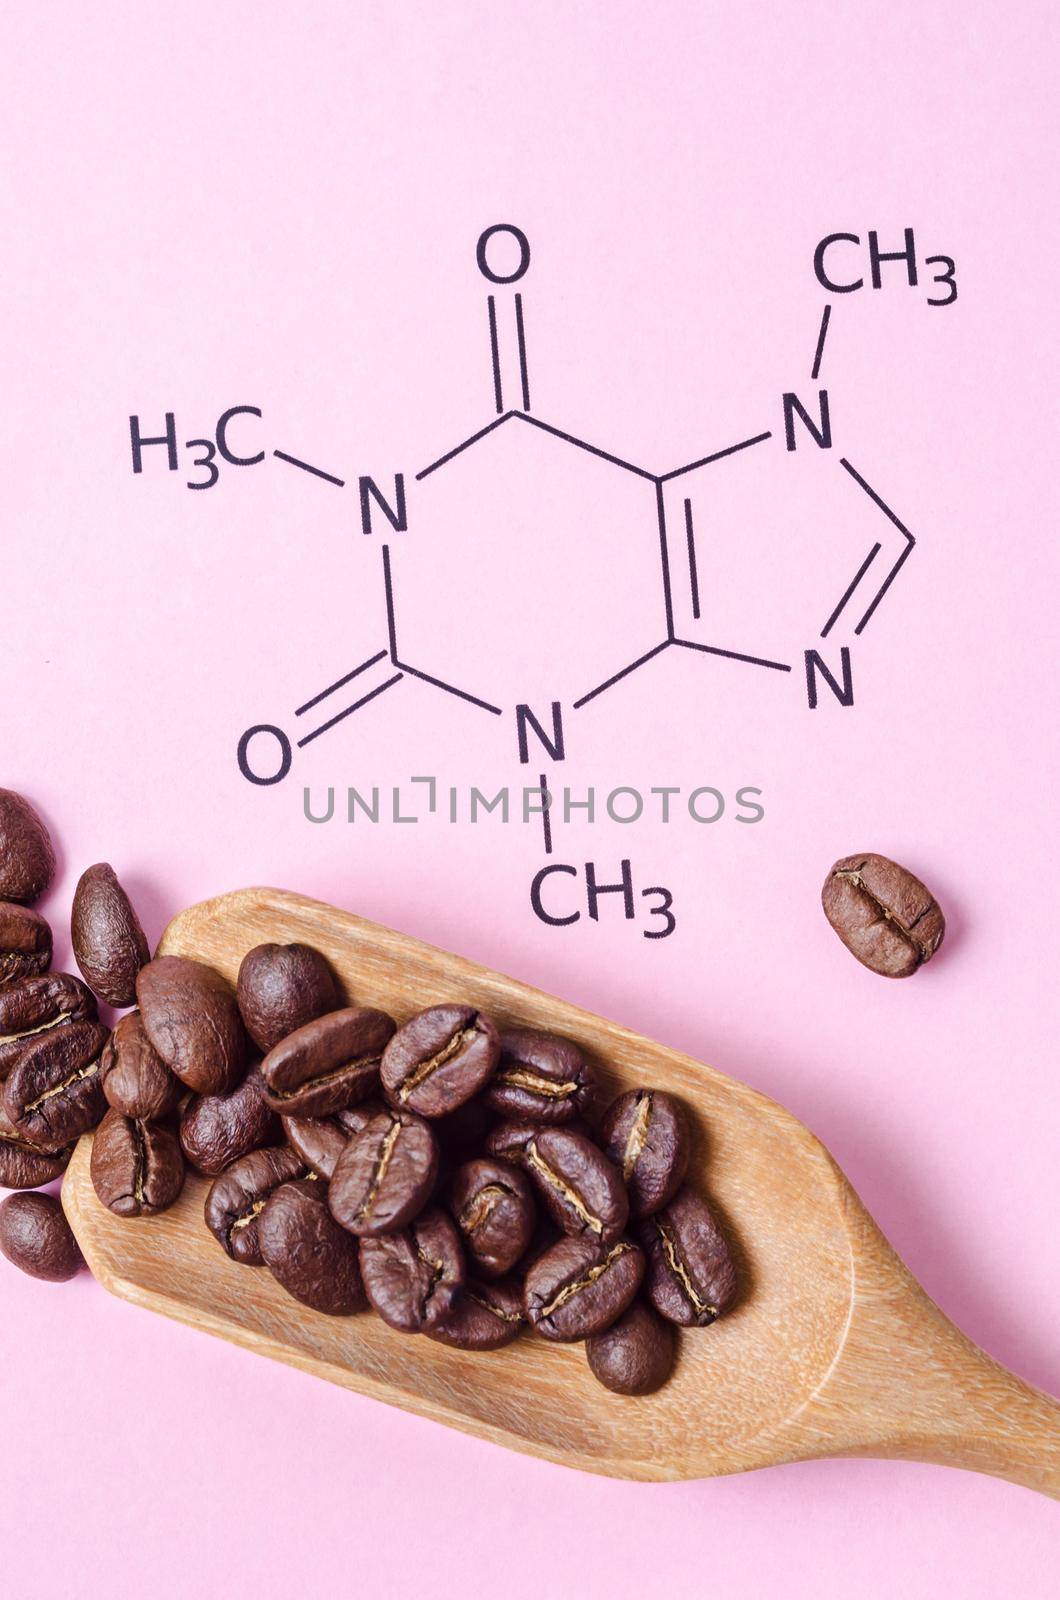 Structural chemical formula of caffeine molecule with roasted coffee beans. Caffeine is a central nervous system stimulant, psychoactive drug molecule.